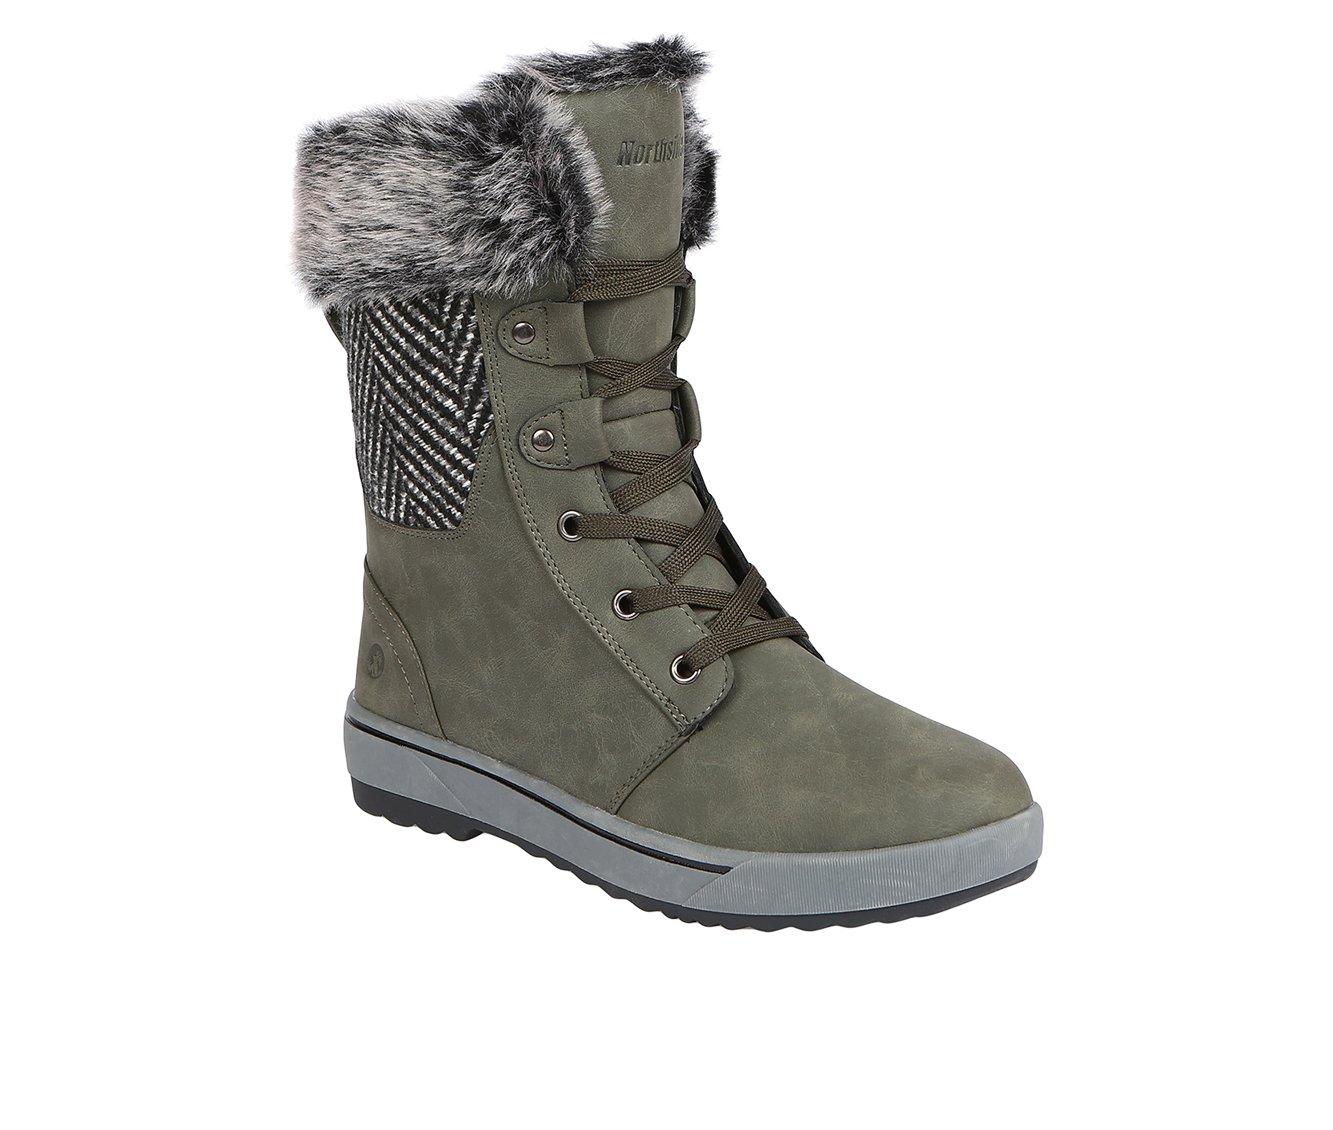 Women's Northside Brookelle Special Edition Winter Boots